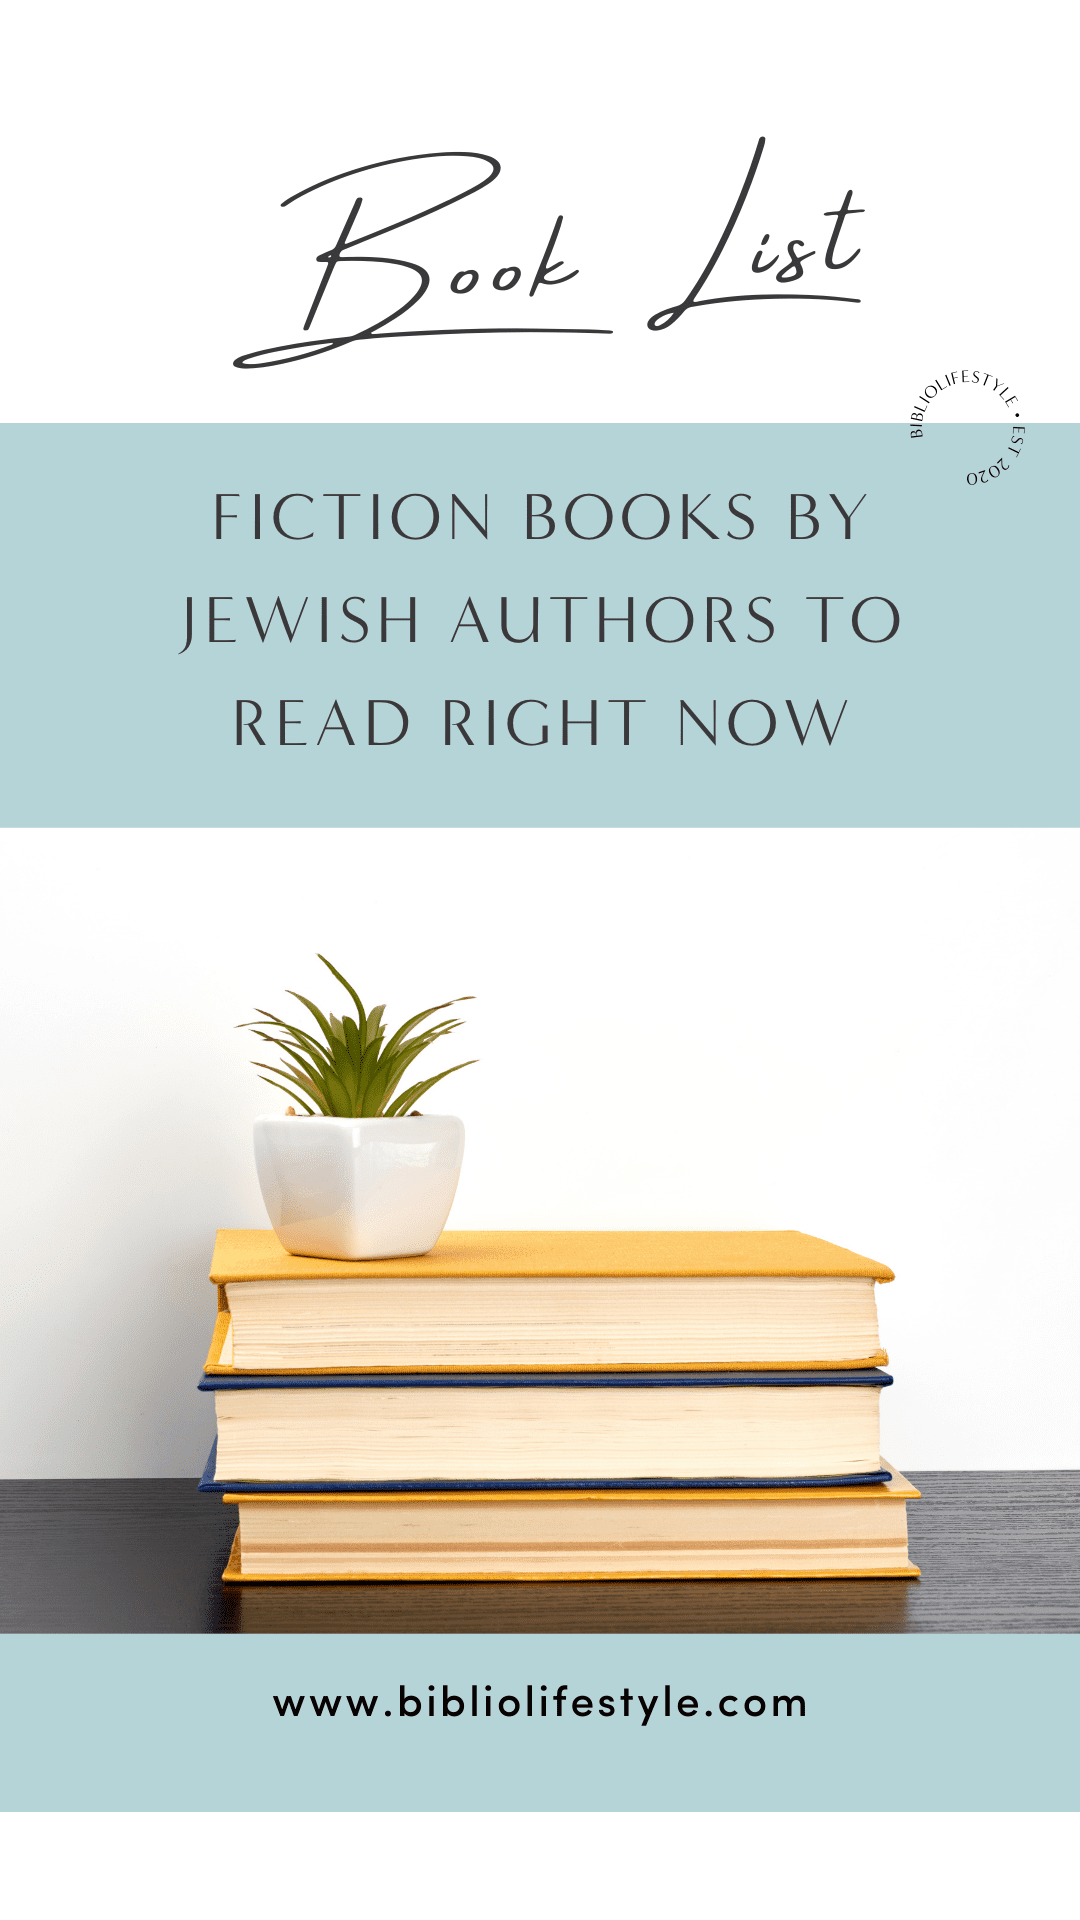 Book List - Fiction Books by Jewish Authors to Read Right Now